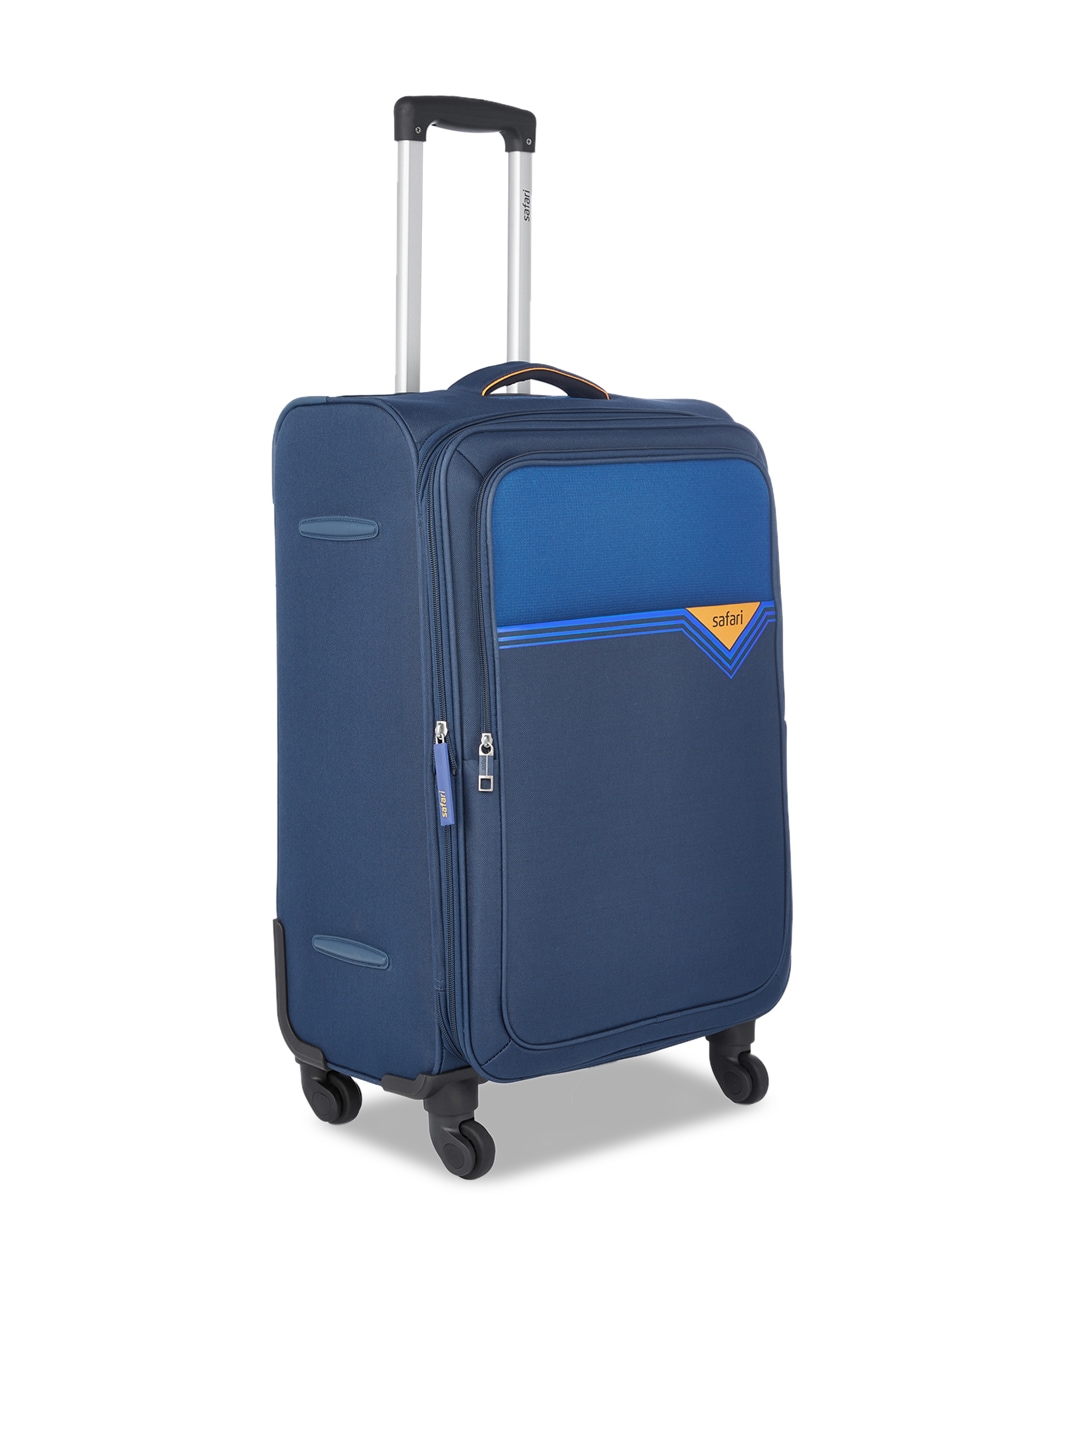 Safari Unisex Blue Solid Large Trolley Suitcase Price in India